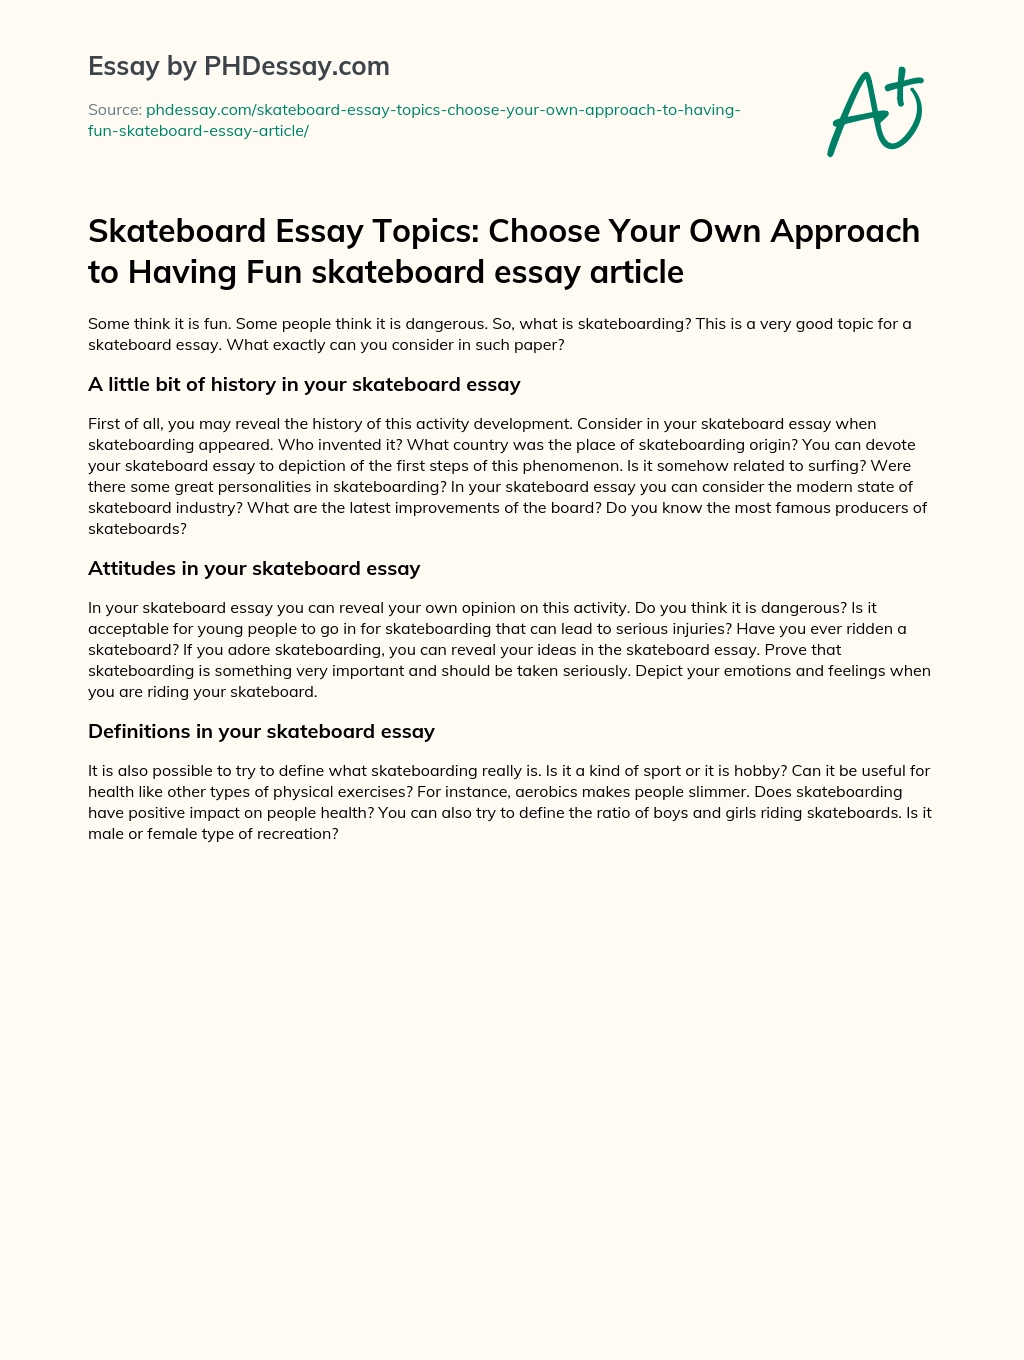 Skateboard Essay Topics: Choose Your Own Approach to Having Fun skateboard essay article essay